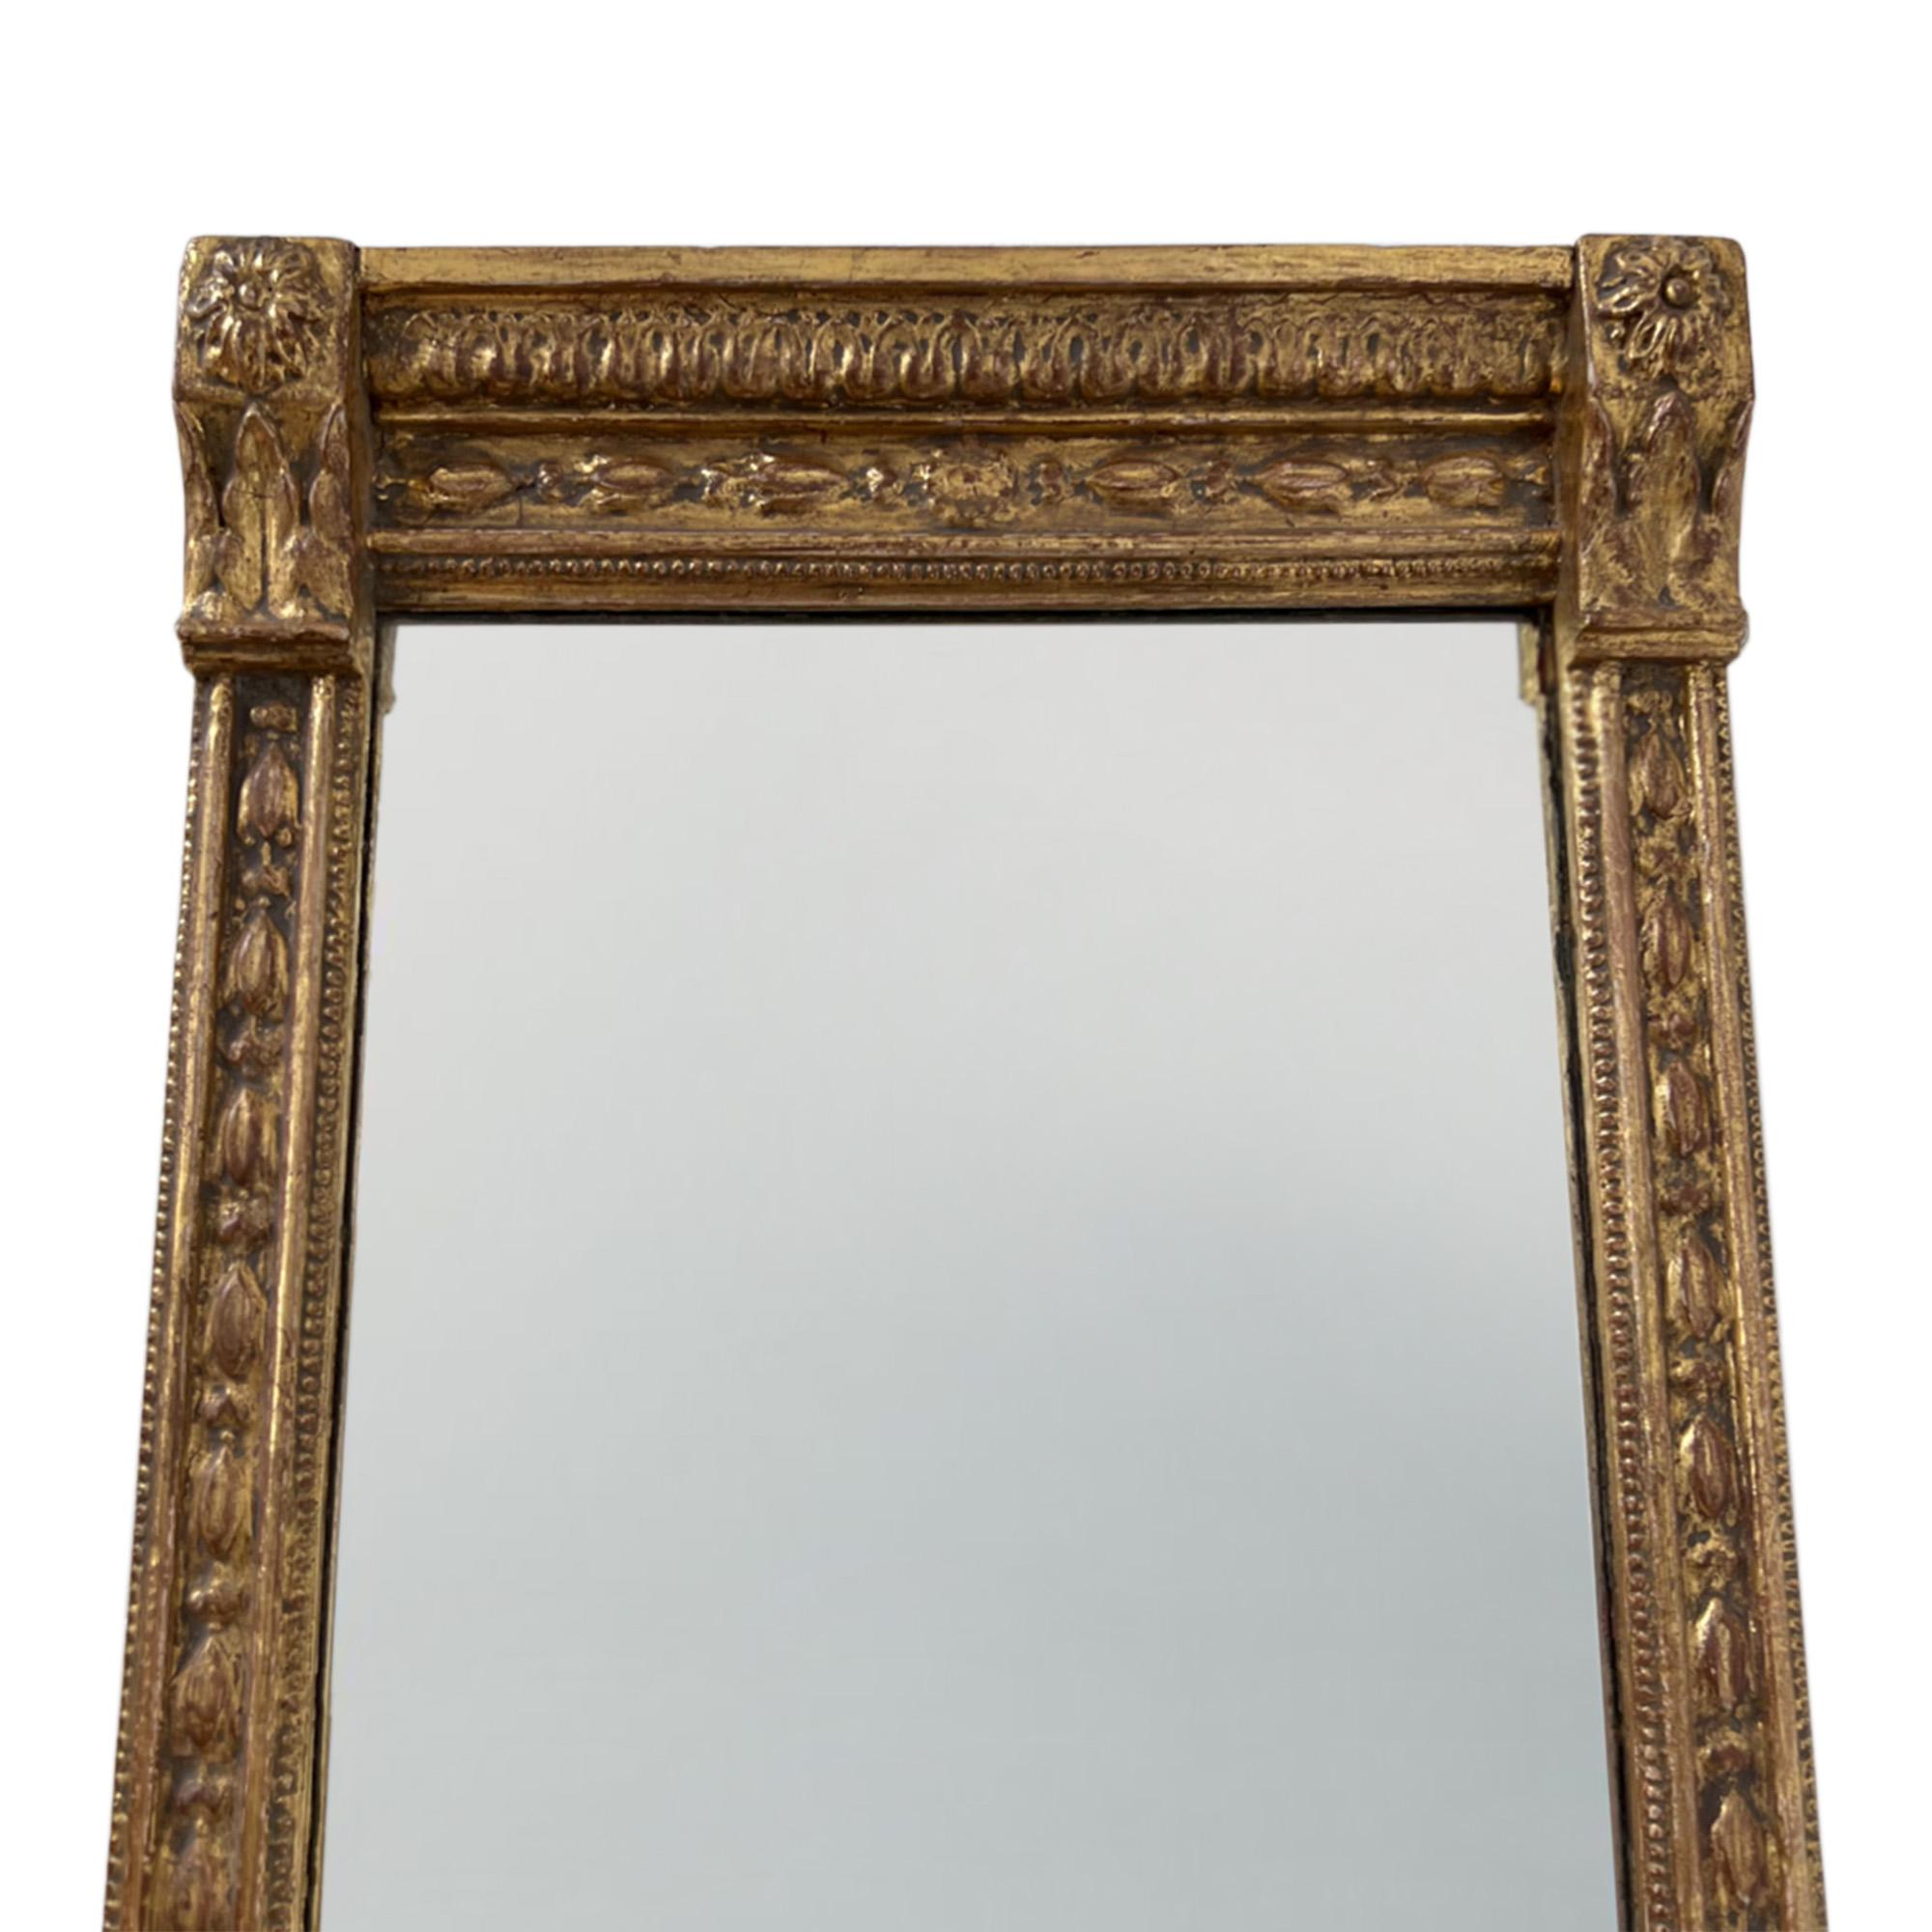 A beautiful pair of English 19th century gilt wood mirrors with carved detail on the frames.

Superb quality and very decorative.

Please note, one mirror is slightly wider than the other - 51cm and 48cm.